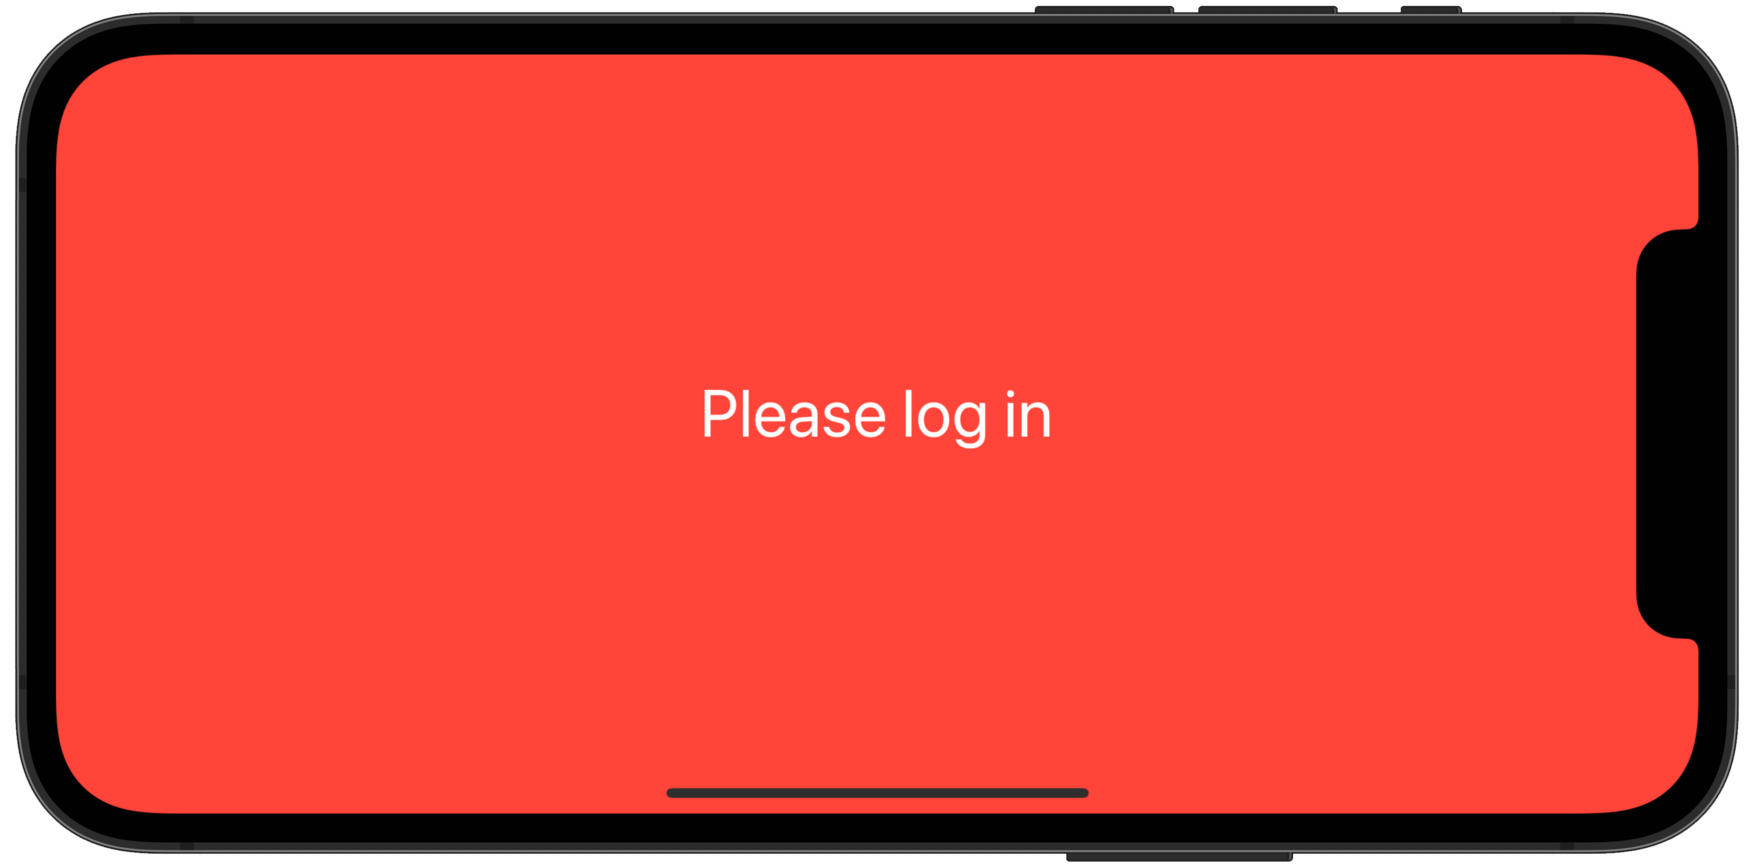 A phone showing the words “Please log in” over a large red background.